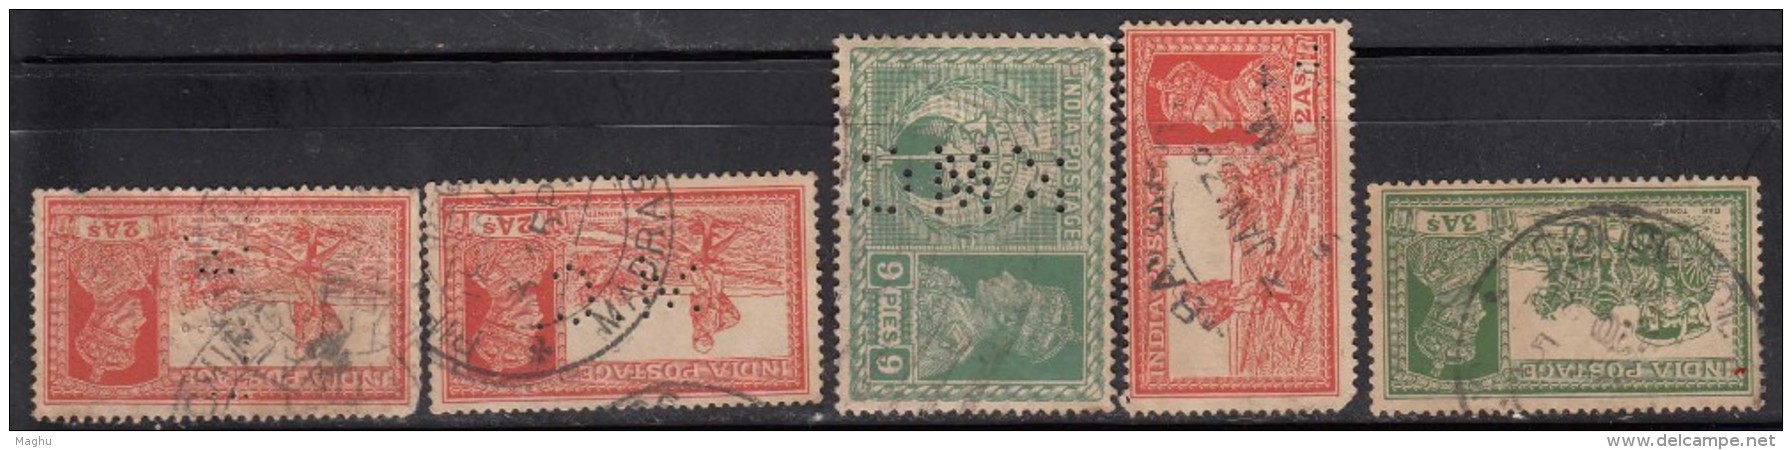 5 Diff., Perfins / Perfin Of KG VI Series, King George British India Used - Perfins